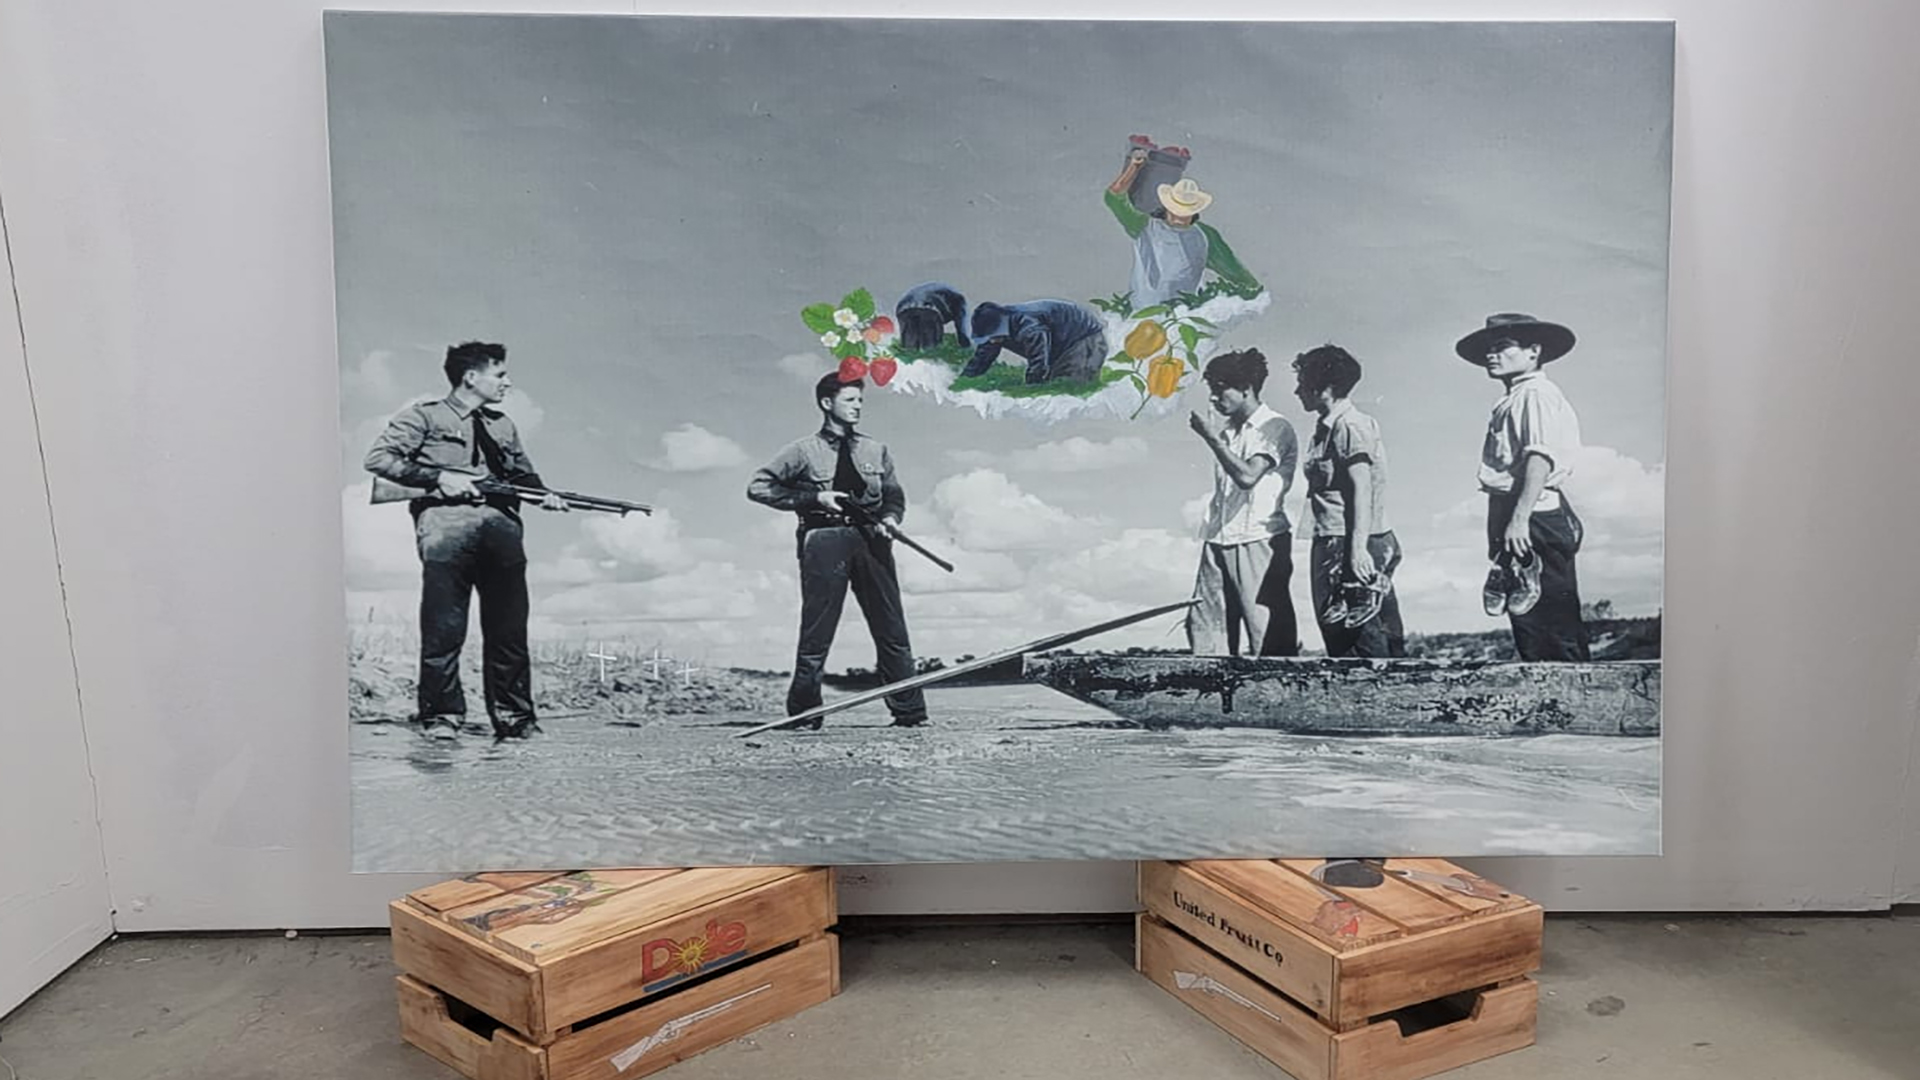 Printed photo on canvas roll of two border patrol agents, 3 migrant men, and 3 agricultural workers